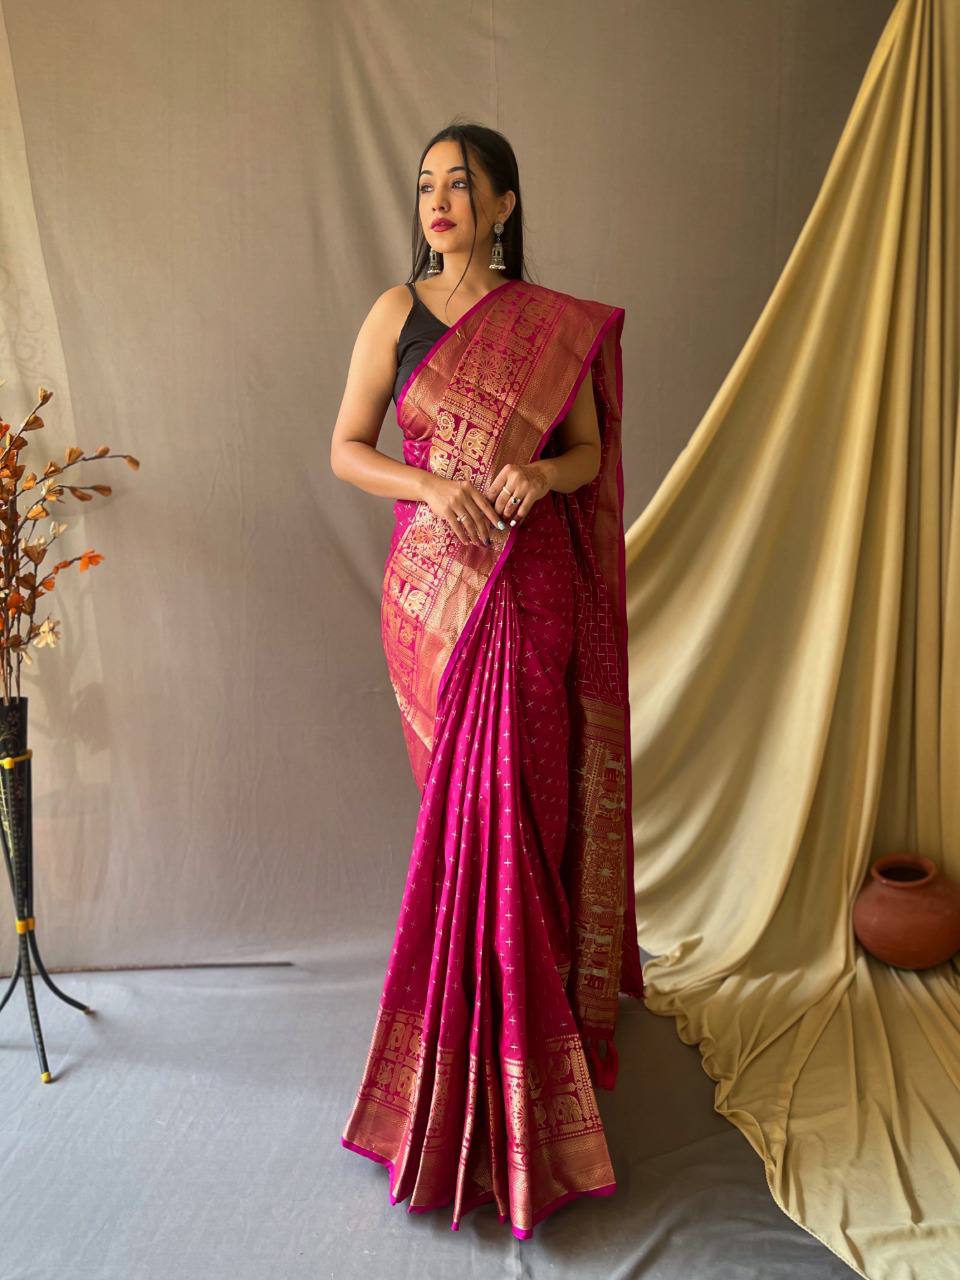 SUPERB ANTIQUE WEAVING USED IN THIS HANDLOOM SAREES